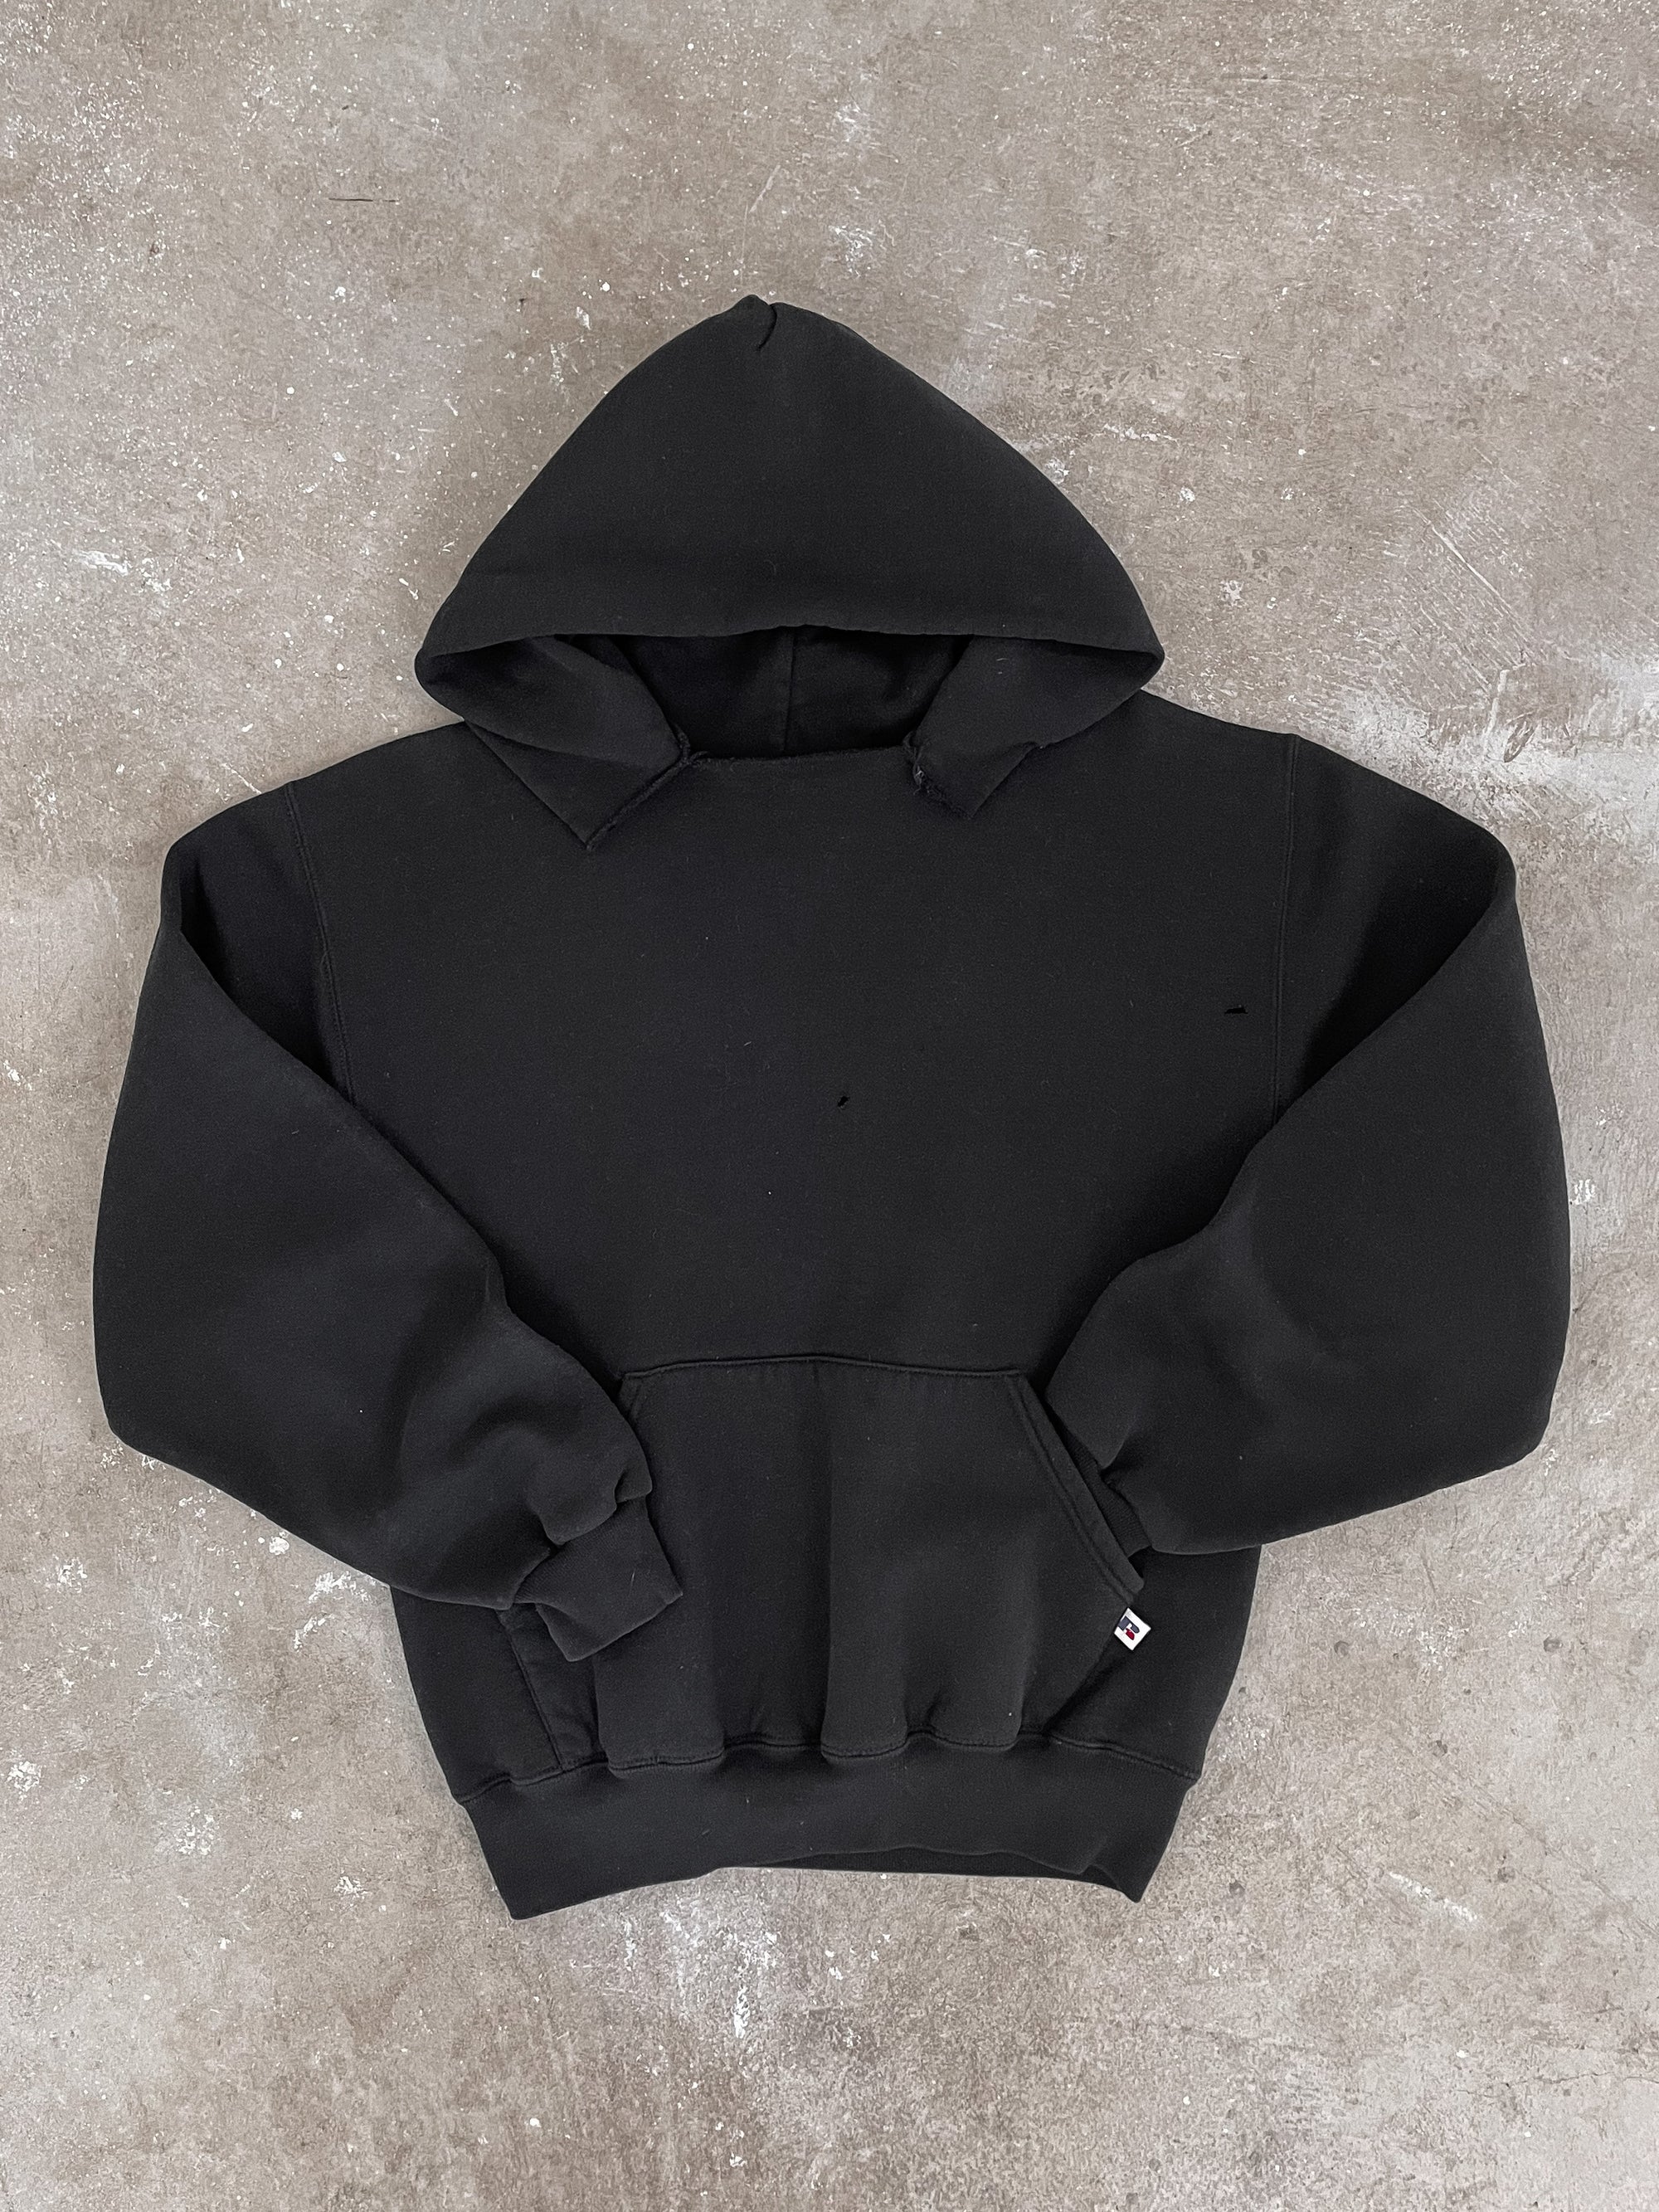 Early 00s Russell Distressed Black Hoodie (S/M)